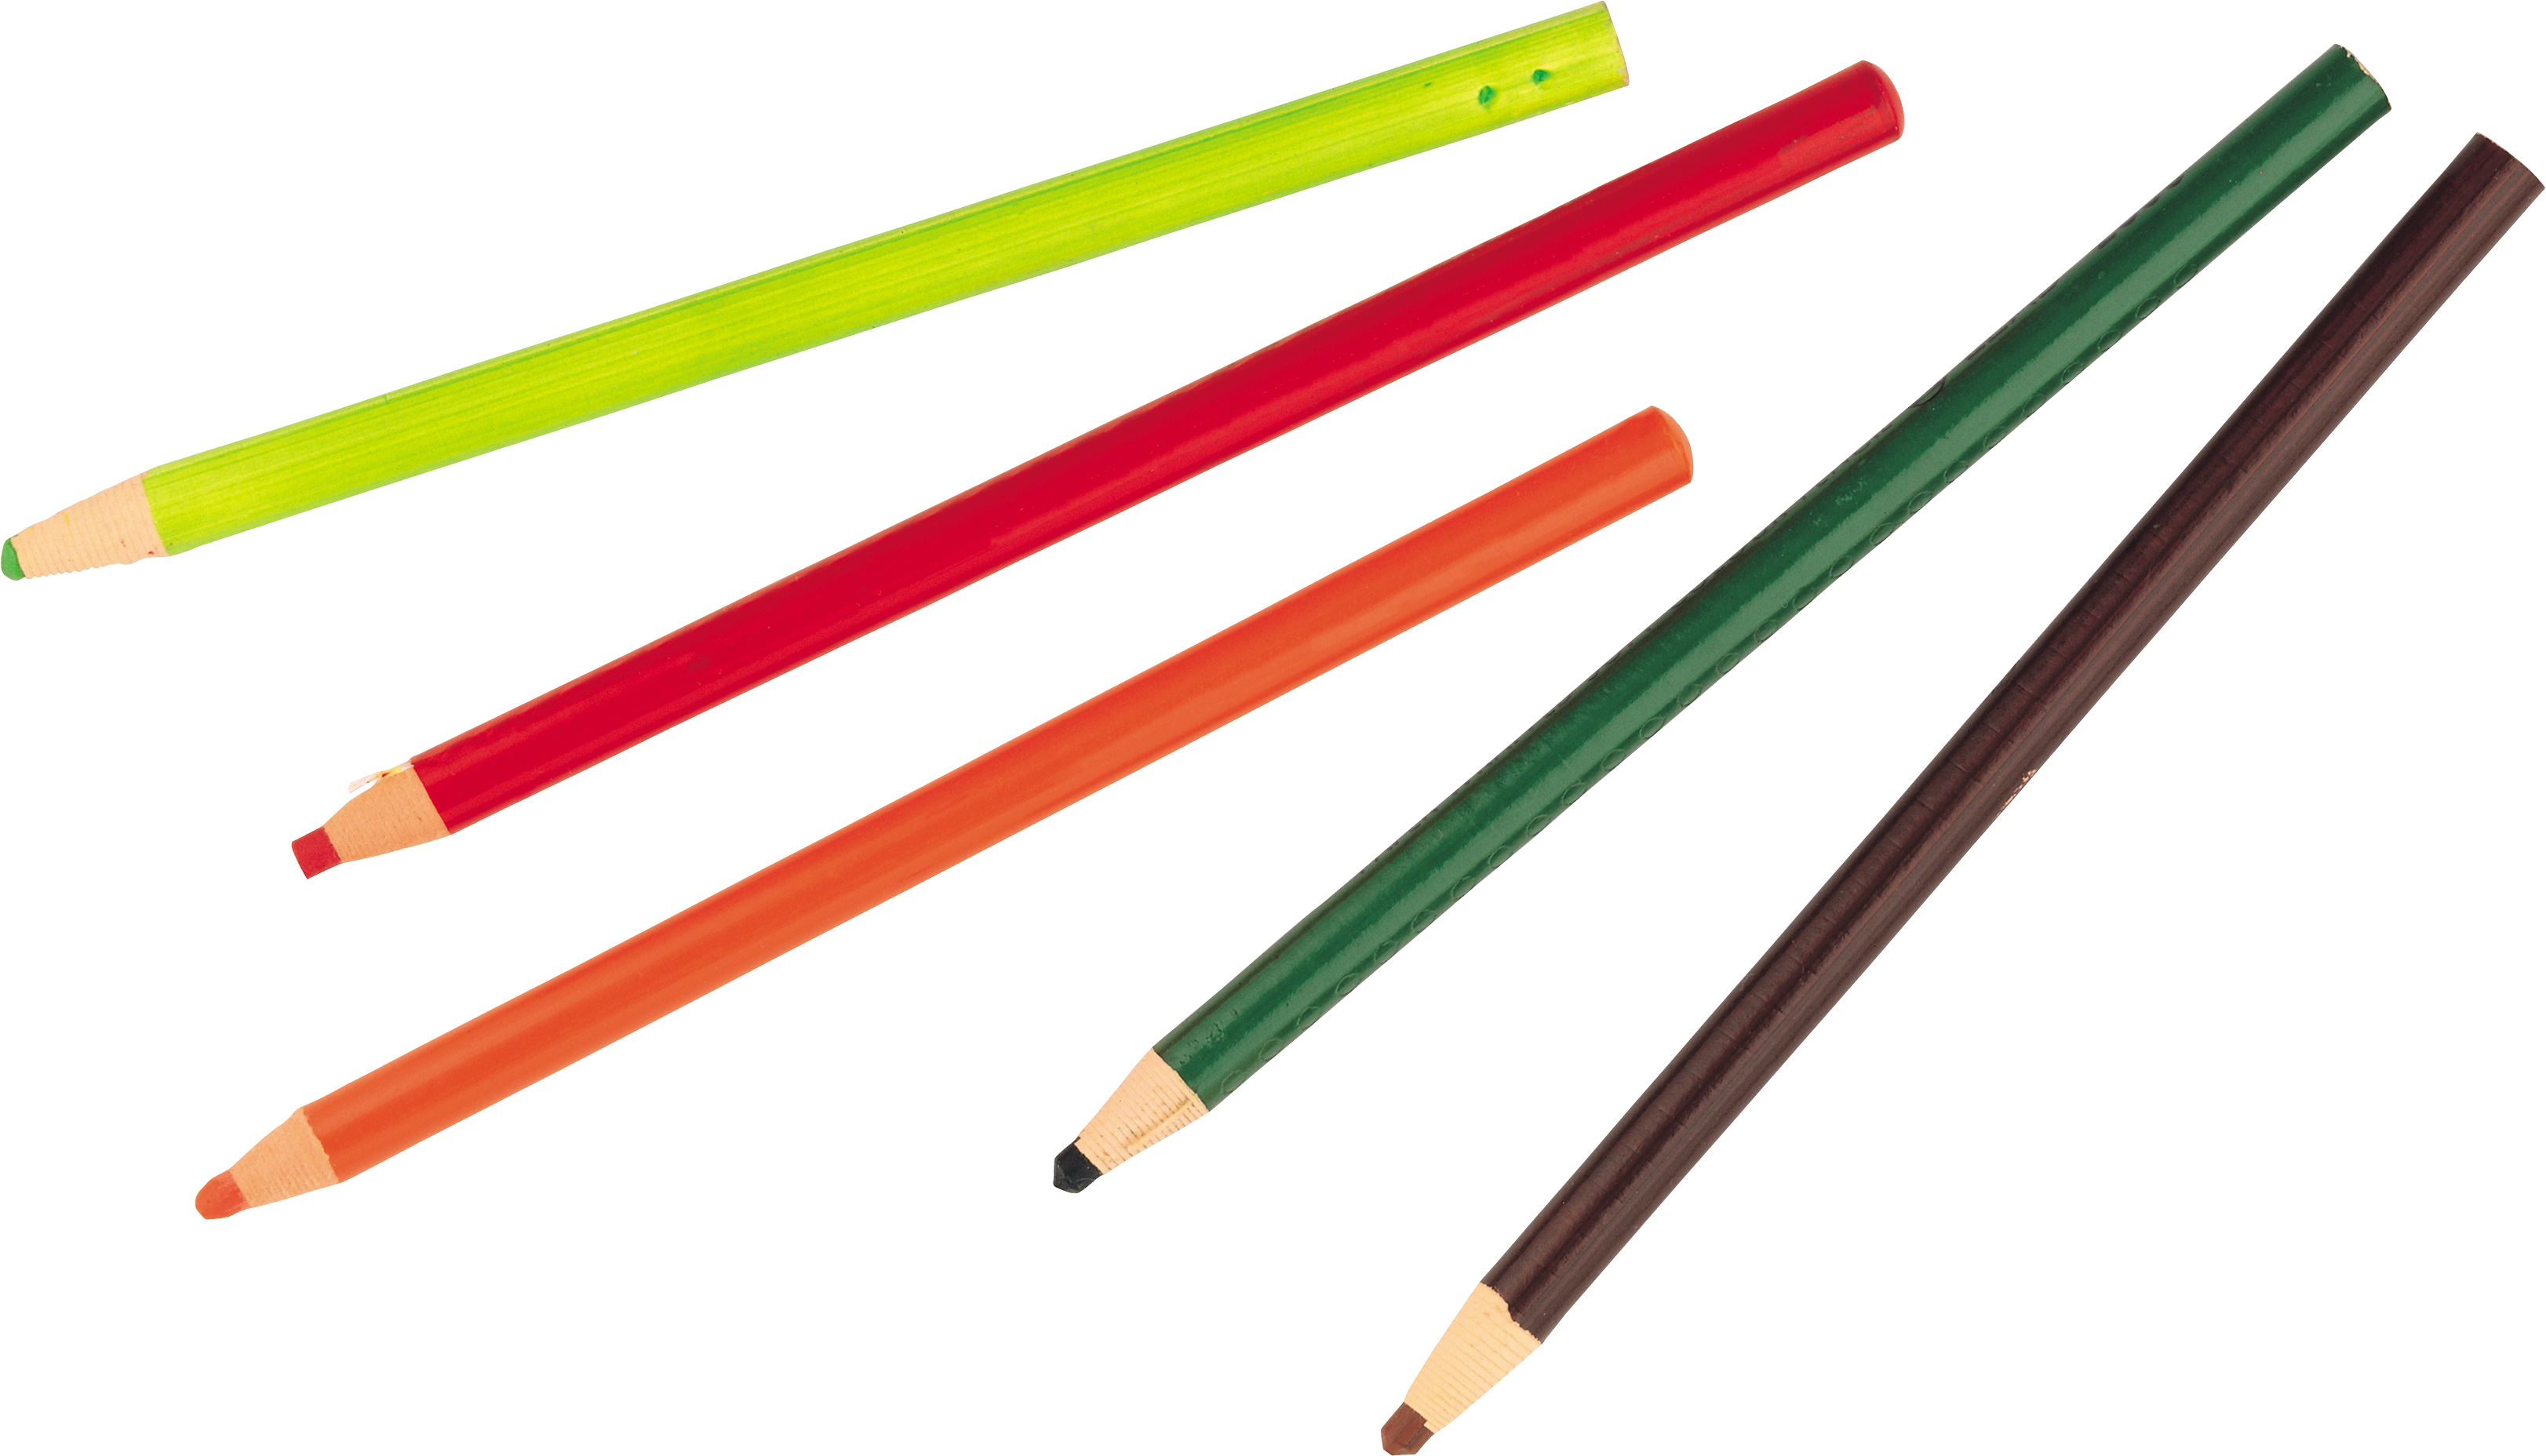 Png images free download. Craft clipart pencil